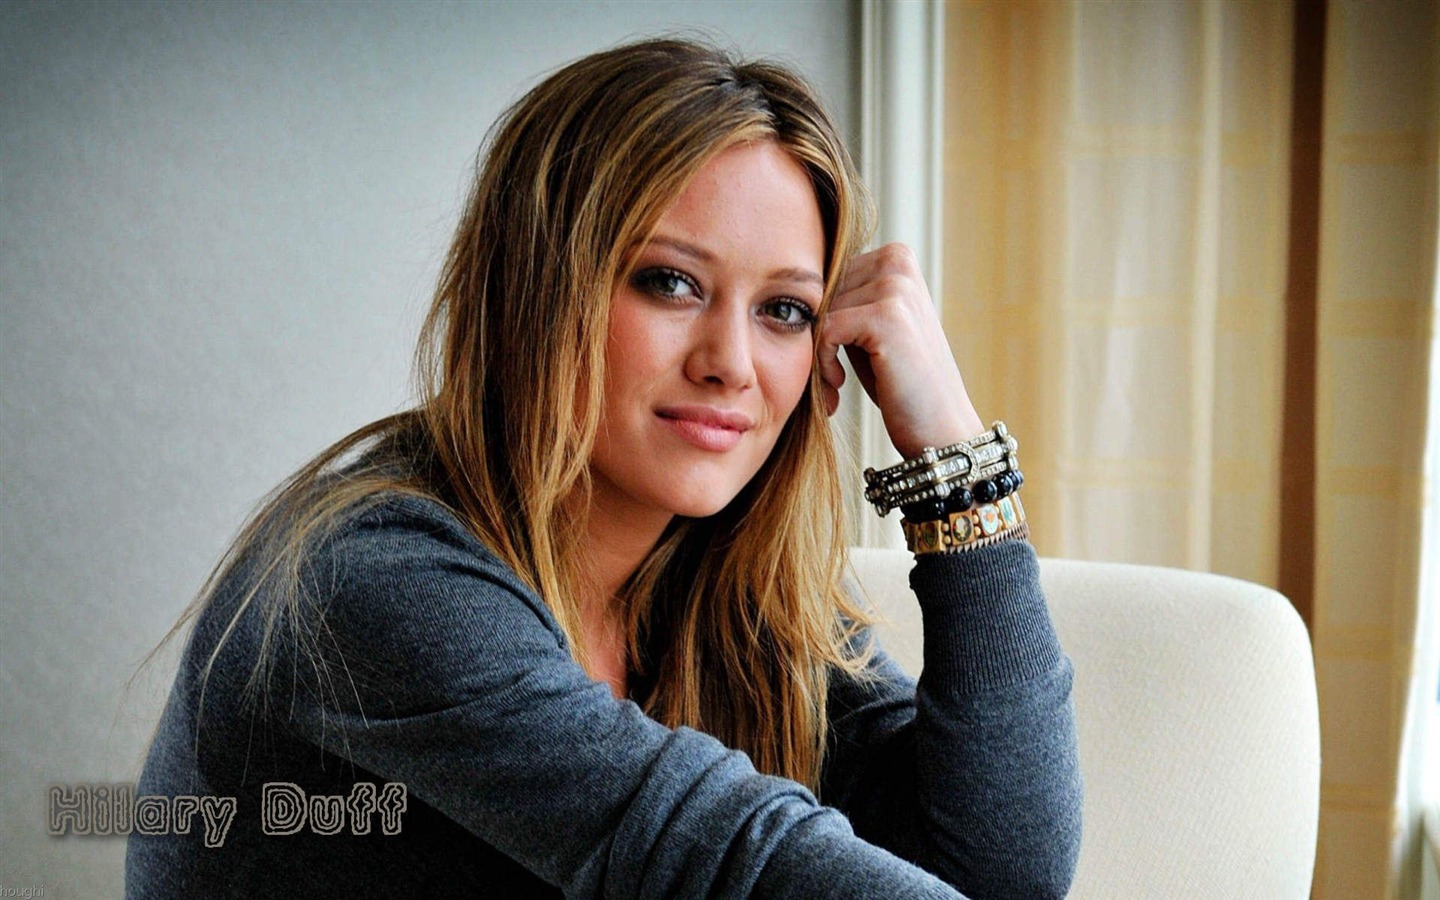 Hilary Duff #060 - 1440x900 Wallpapers Pictures Photos Images